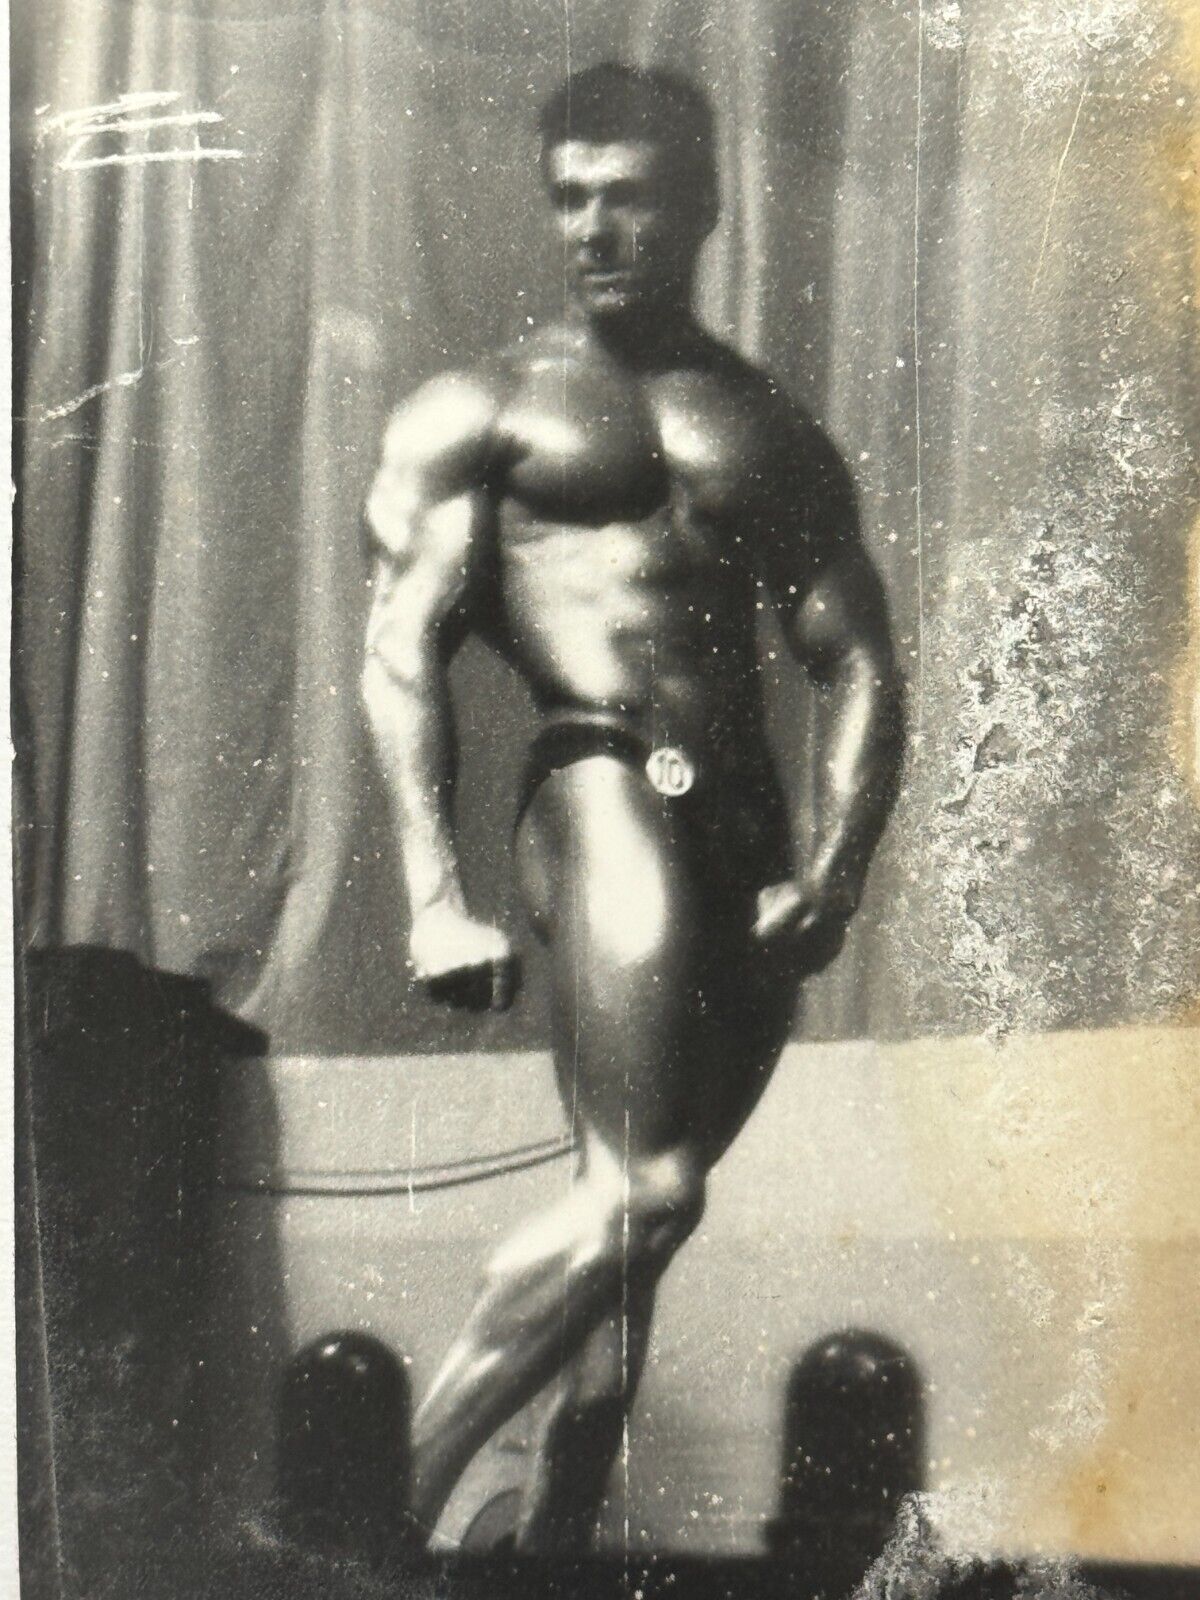 1980s Handsome Muscular Bodybuilder Male Physique Man Gay int Vintage B&W Photo